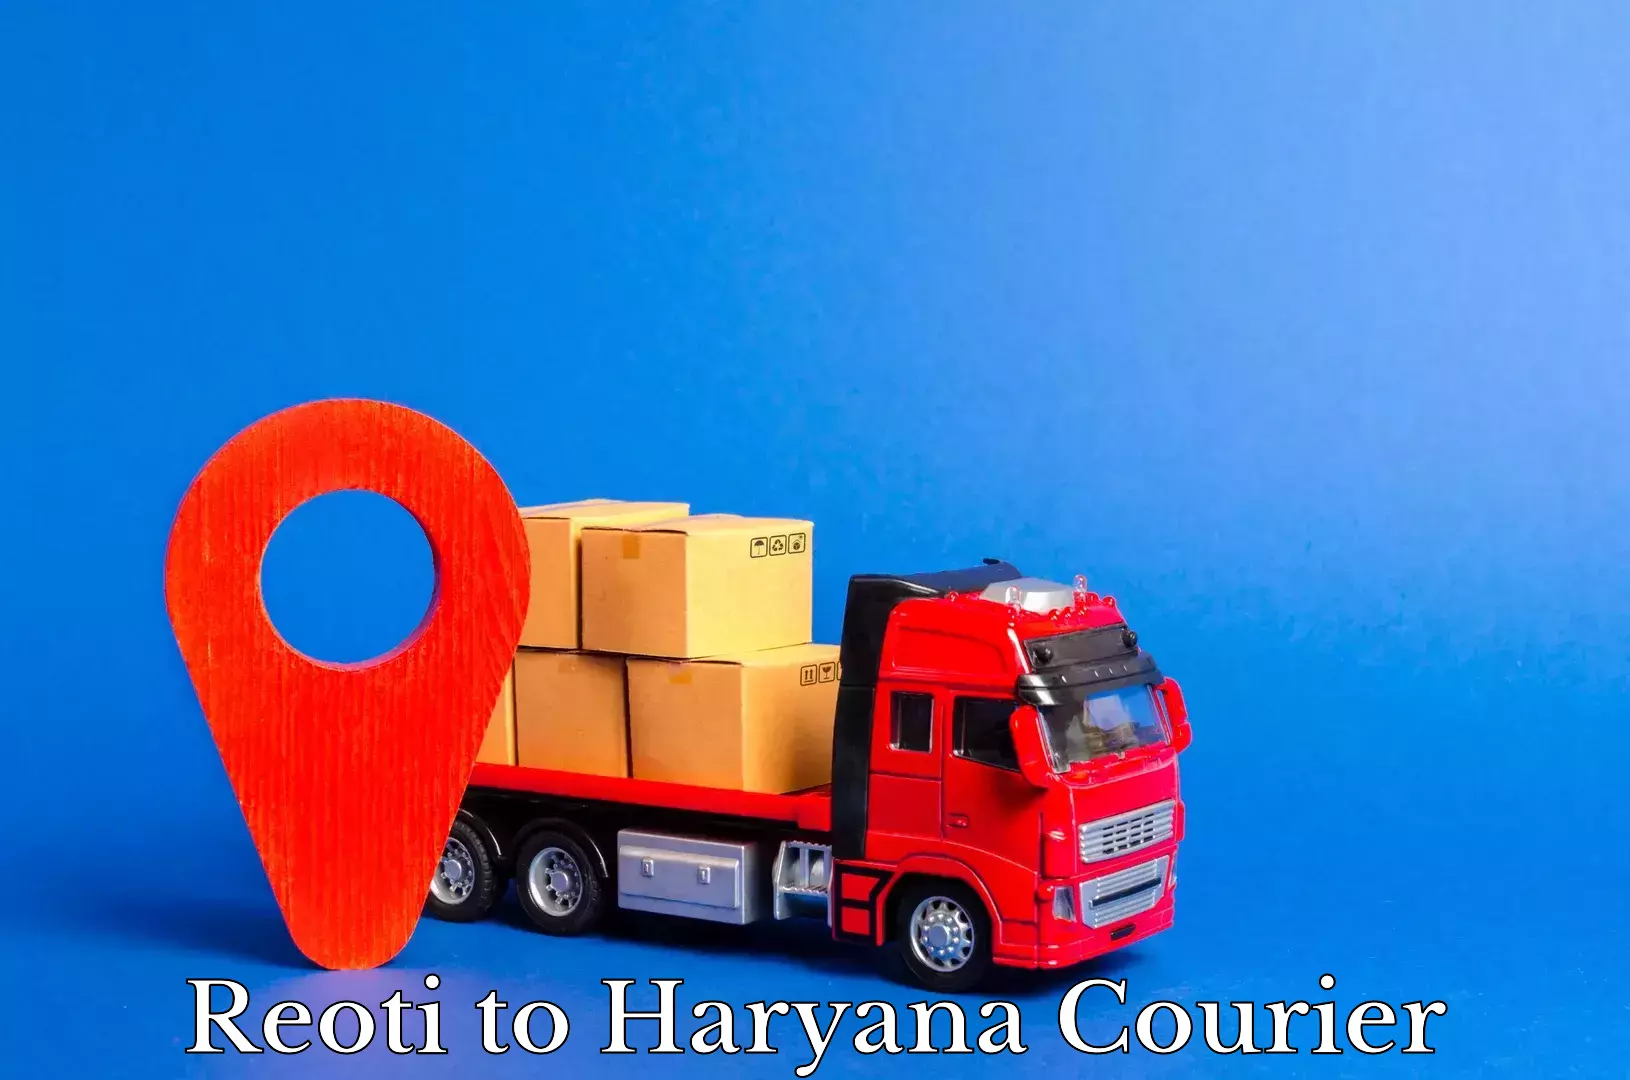 Supply chain efficiency in Reoti to Haryana